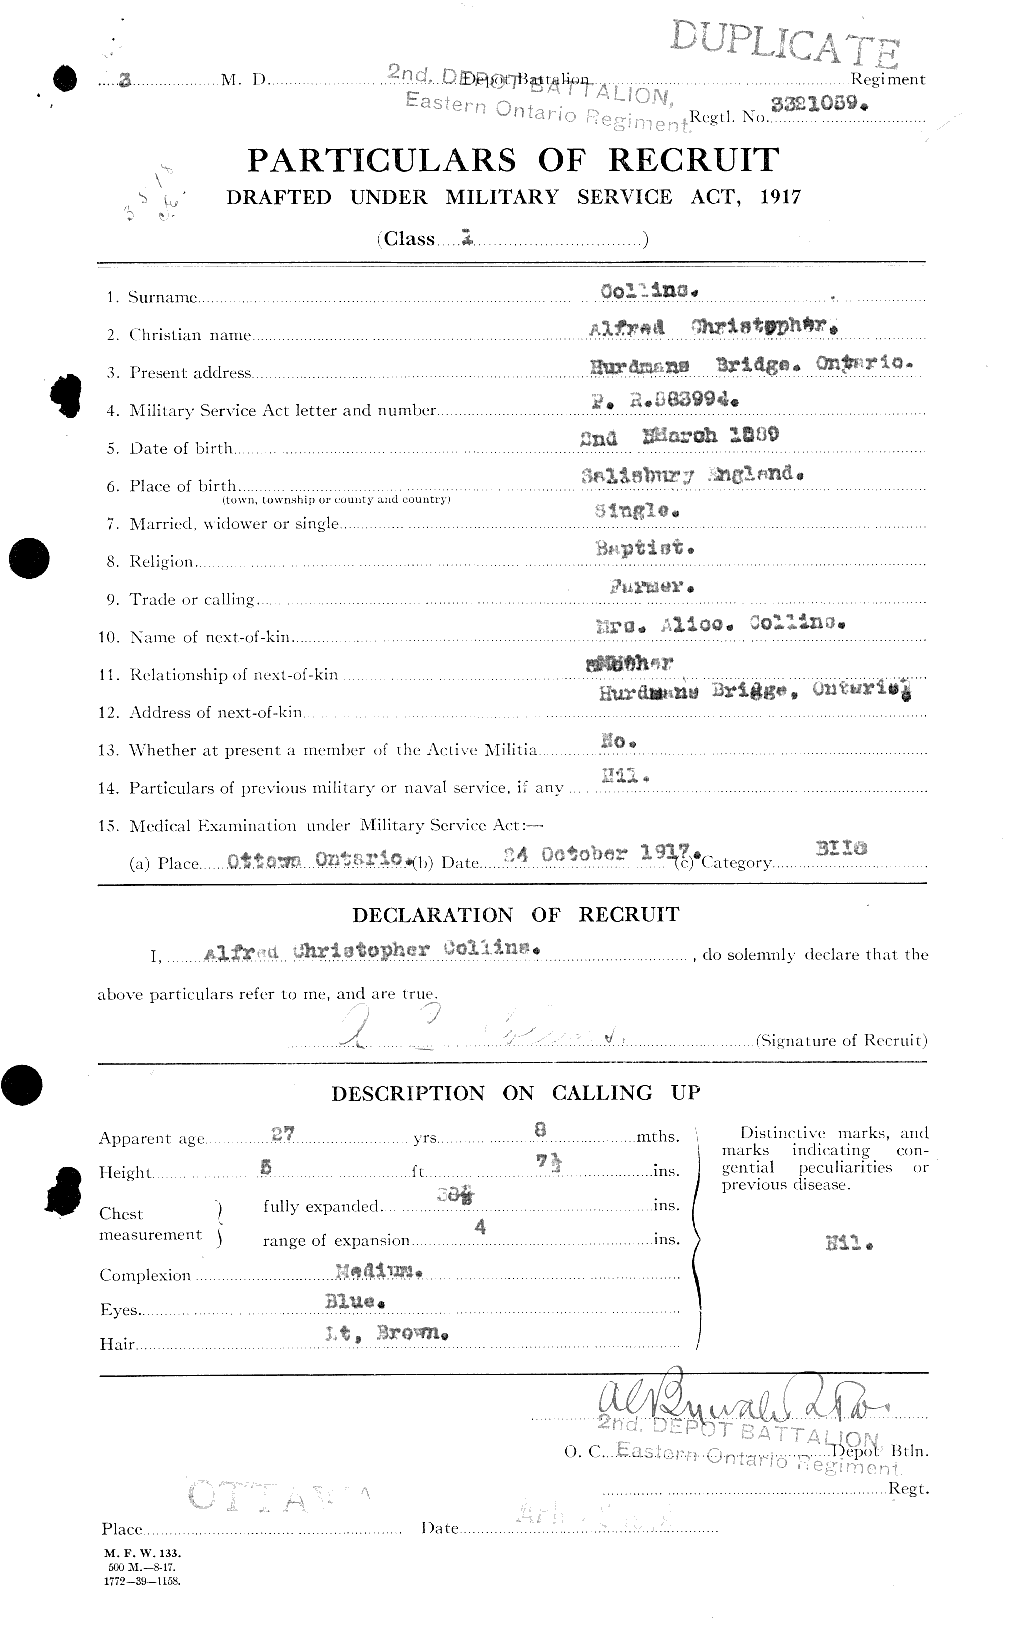 Personnel Records of the First World War - CEF 028955a